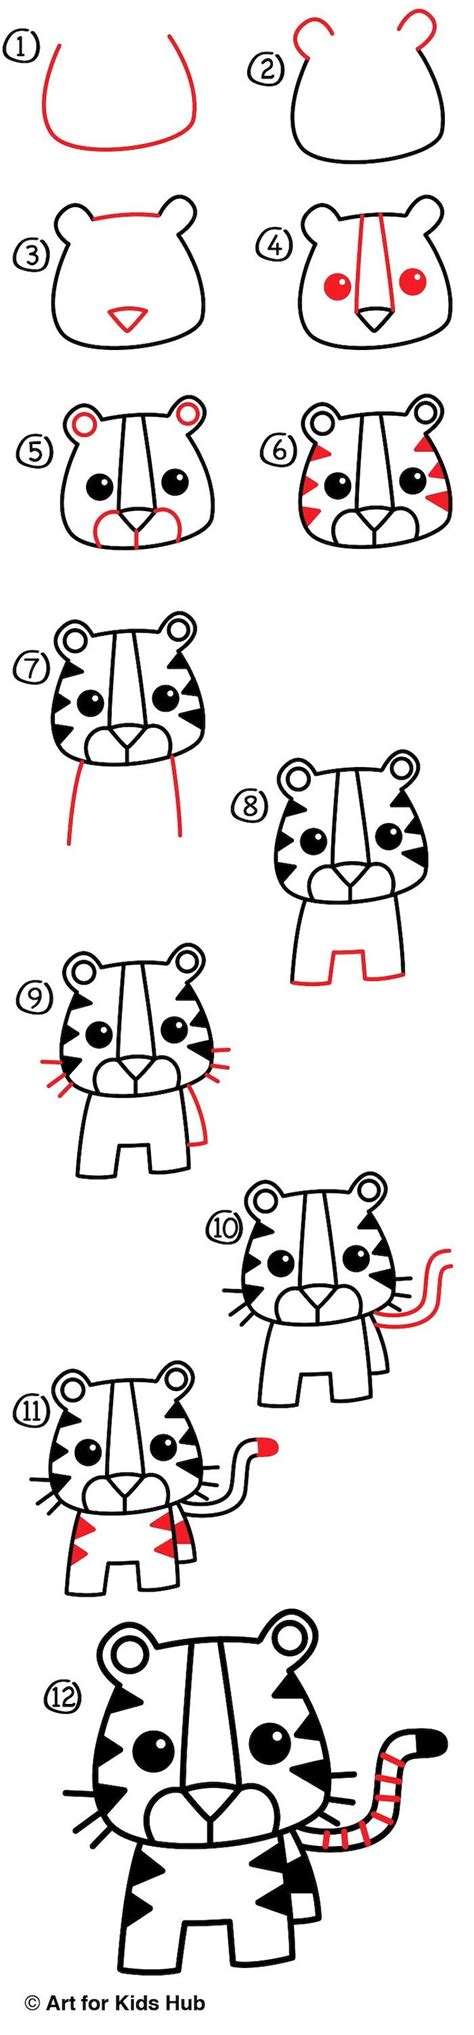 Easy Drawing Tutorials How To Draw A Baby Tiger In Twelve